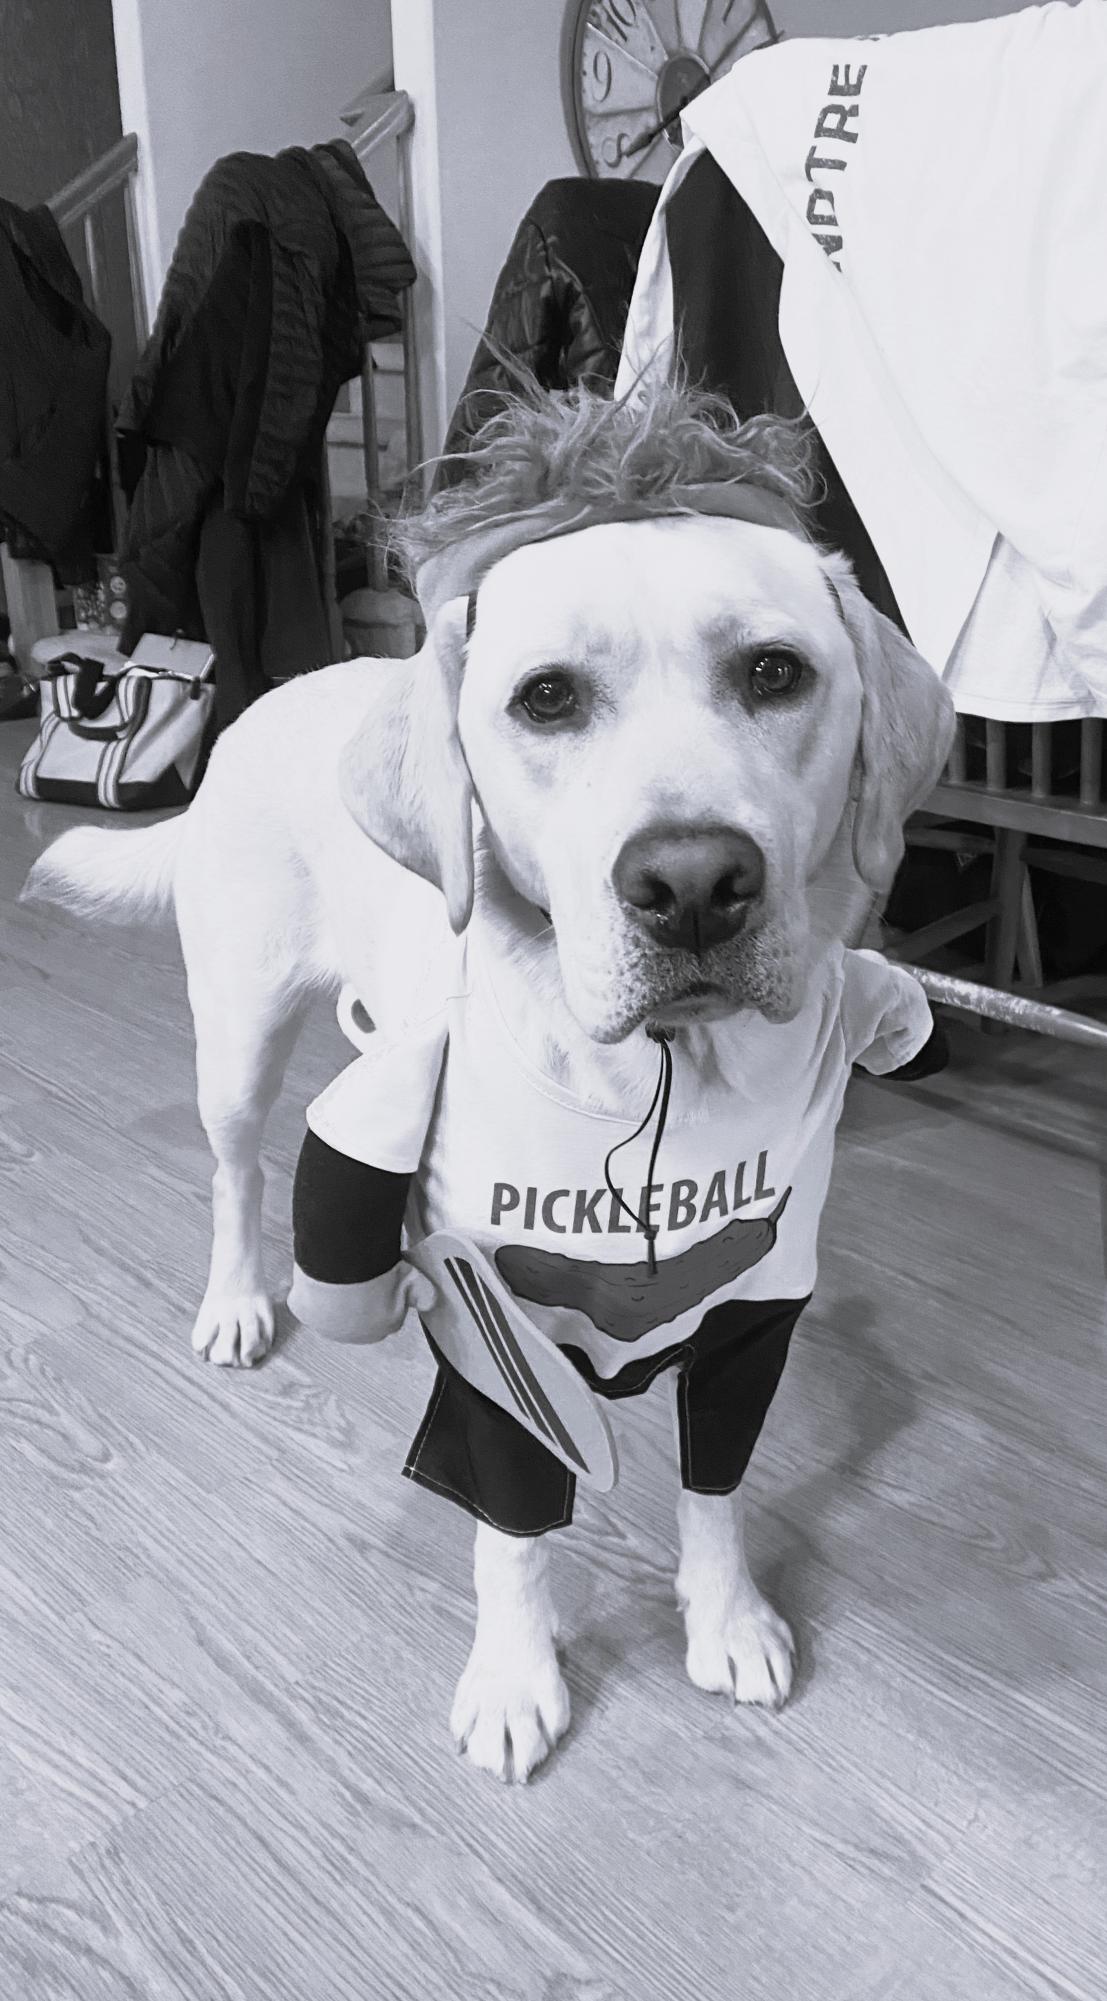 Scout is a pickleball fan, like so many are! 
Photo submitted by Drew Burris